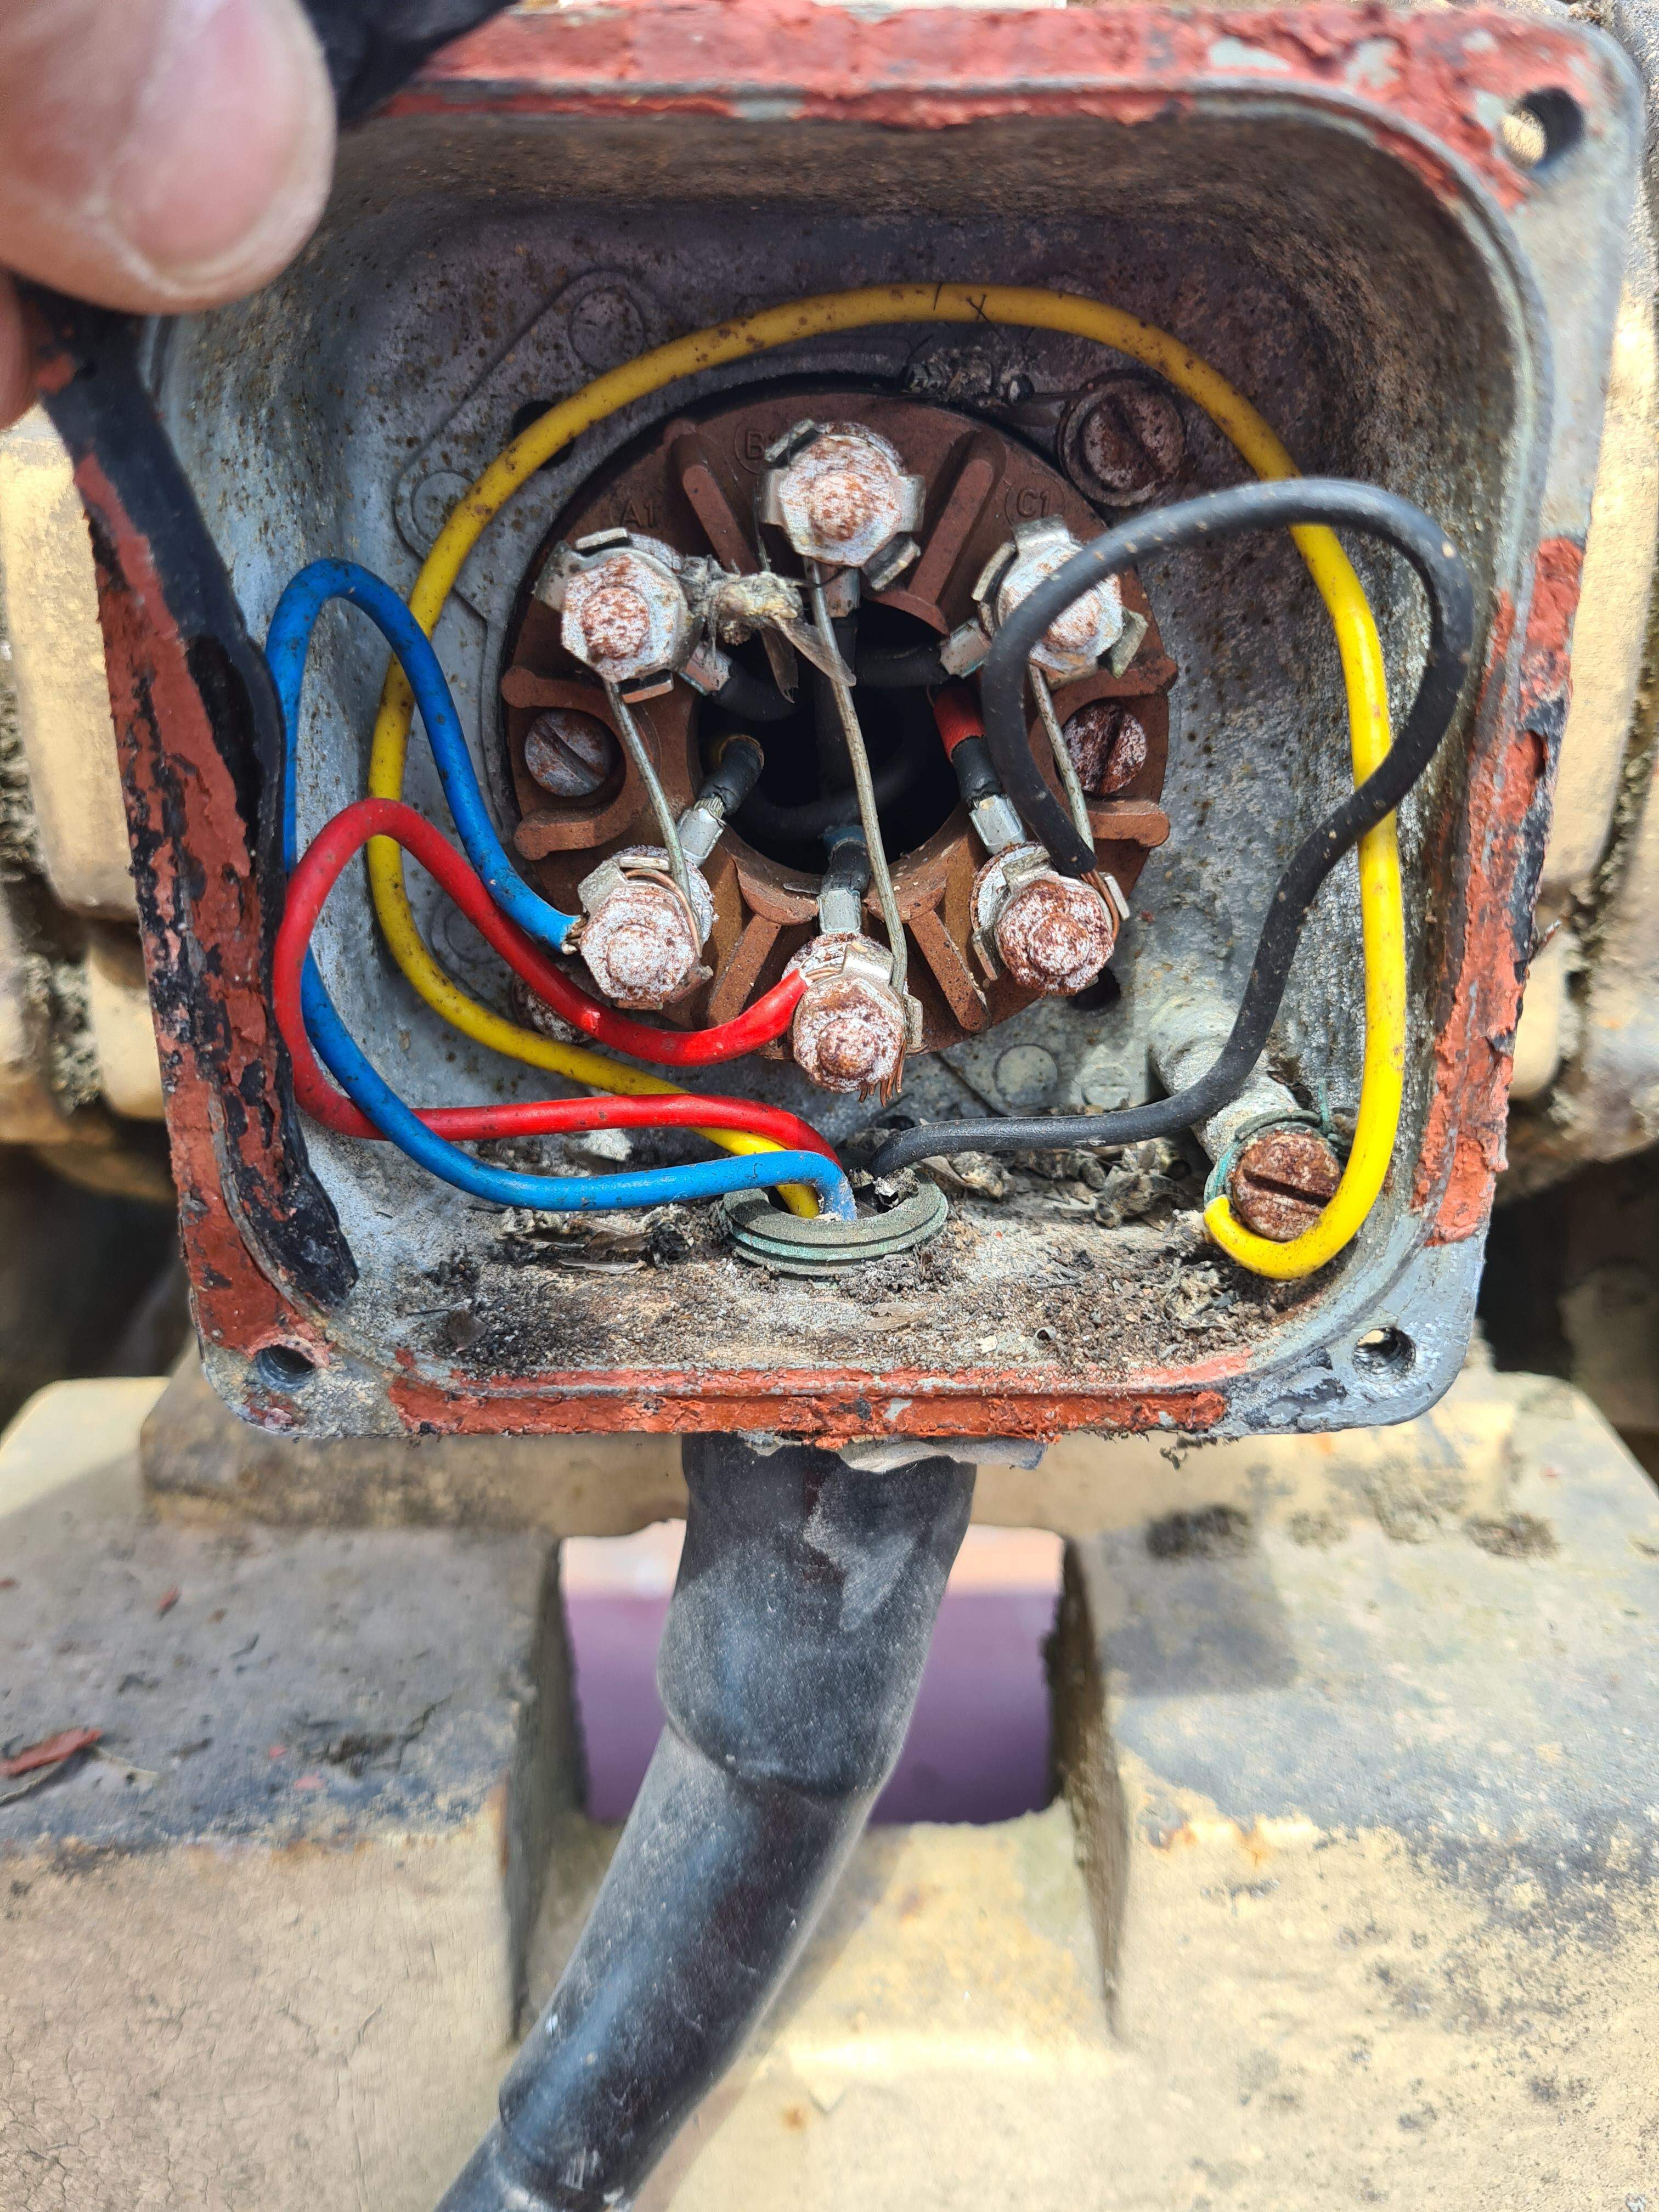 Correct wiring of siren following tripping fault after being re-sited.